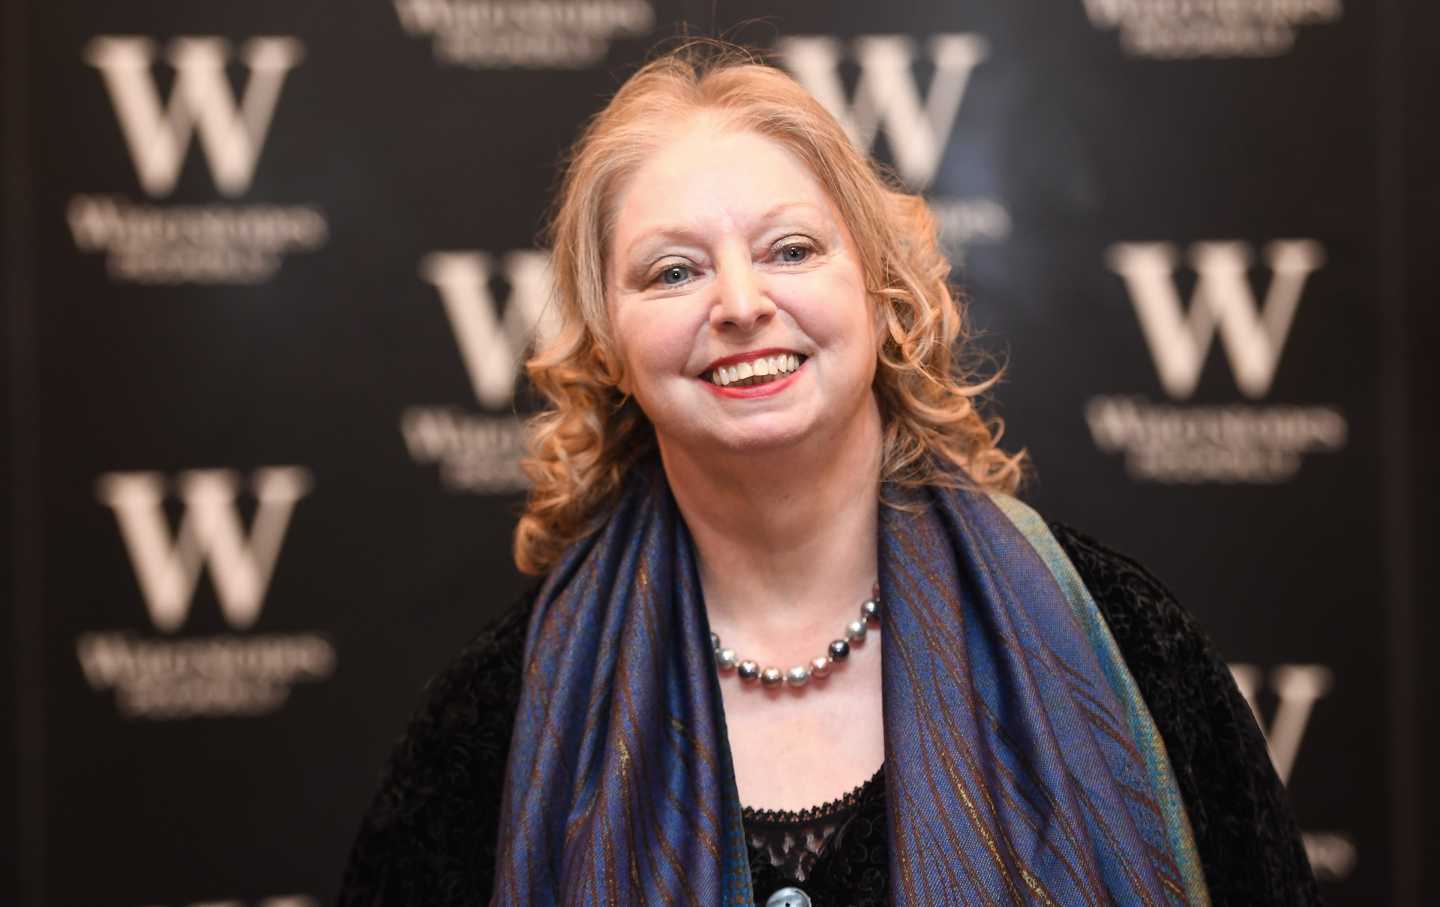 Suck It, Roth: On Hilary Mantel’s Second Booker Win